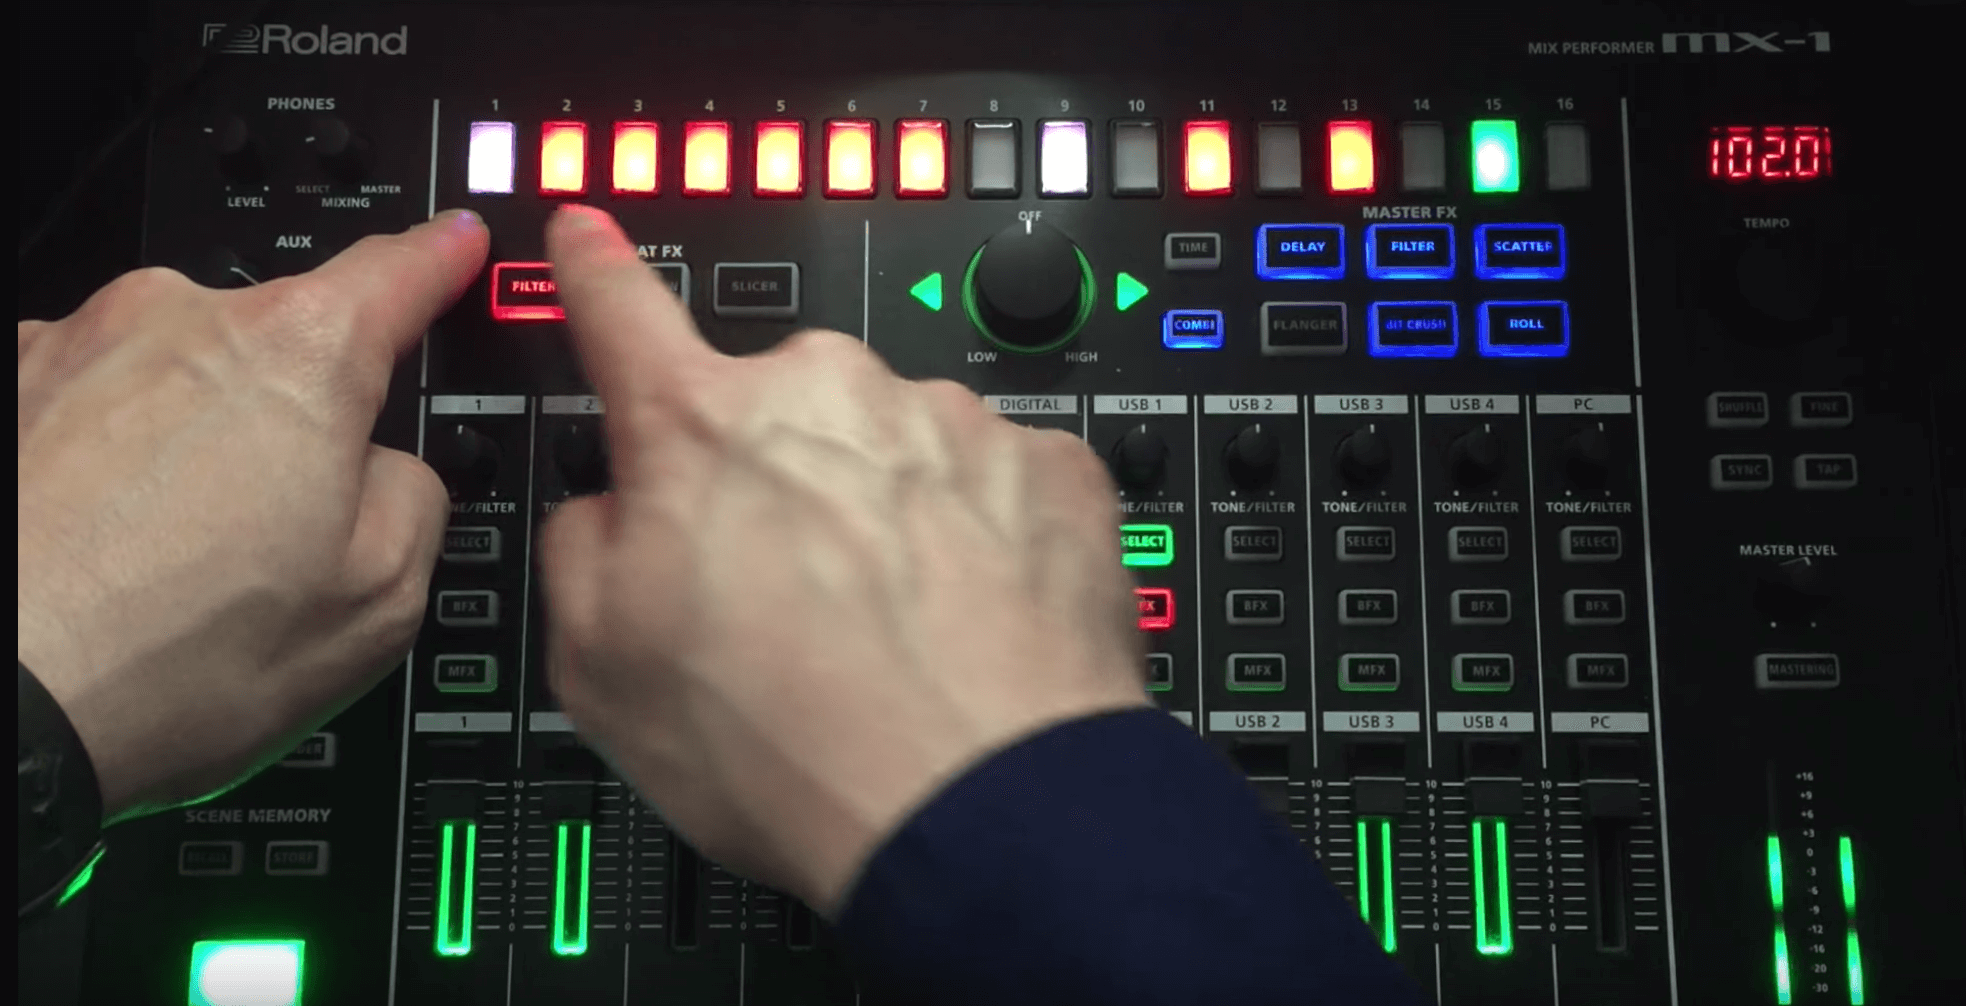 Is the Roland MX-1 Mixer the ultimate Roland Boutique mixer?